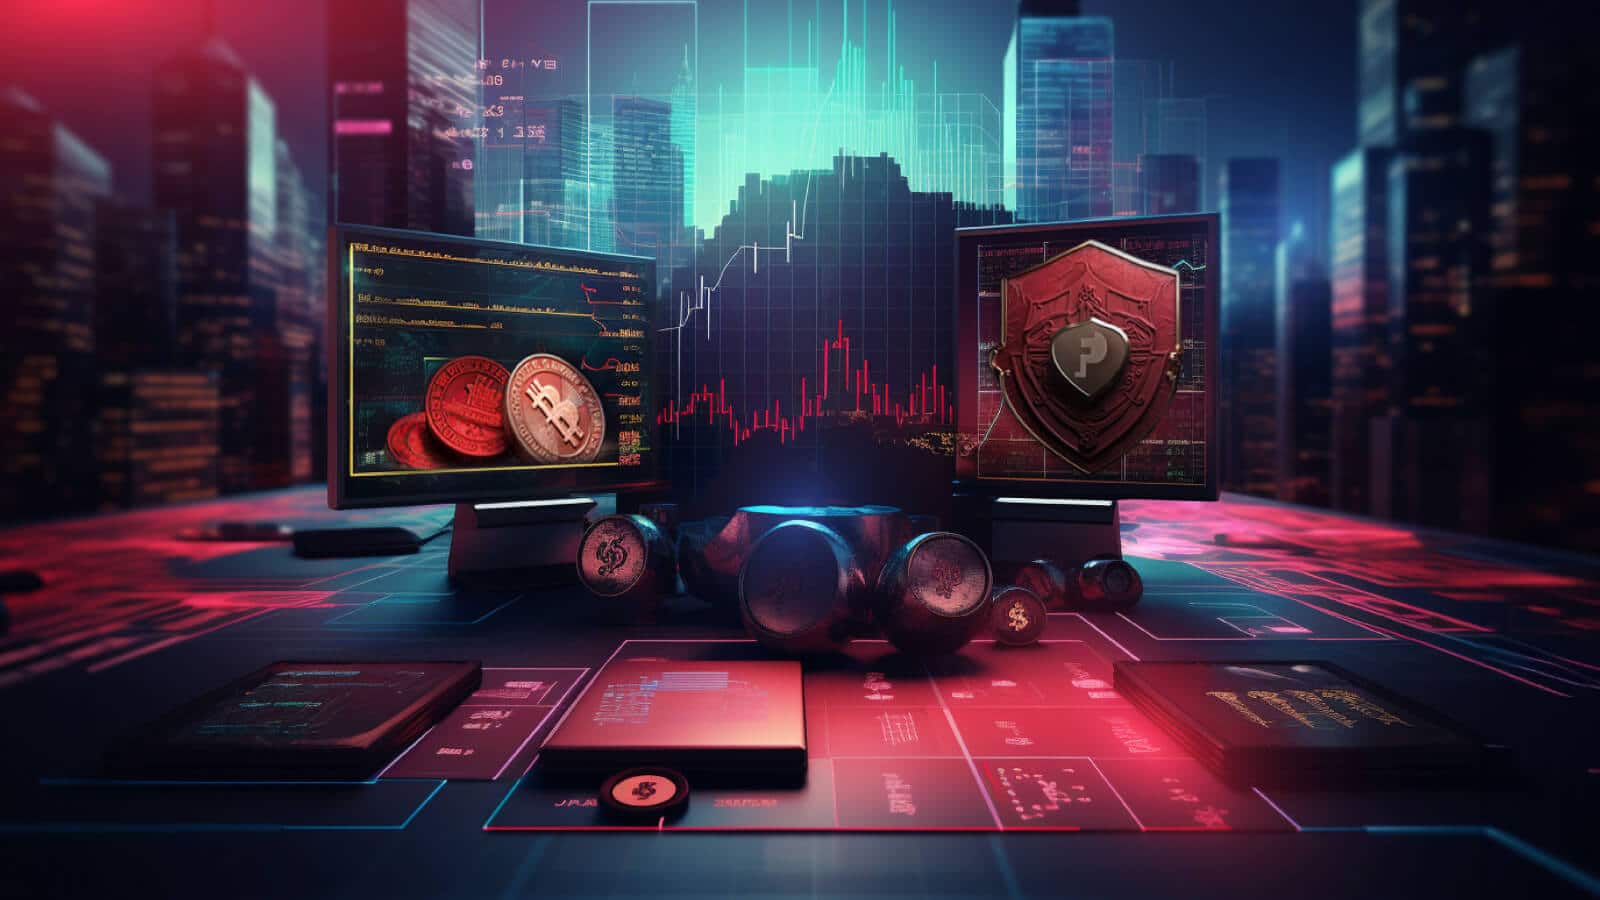 A futuristic trading environment with a shield representing dynamic risk management